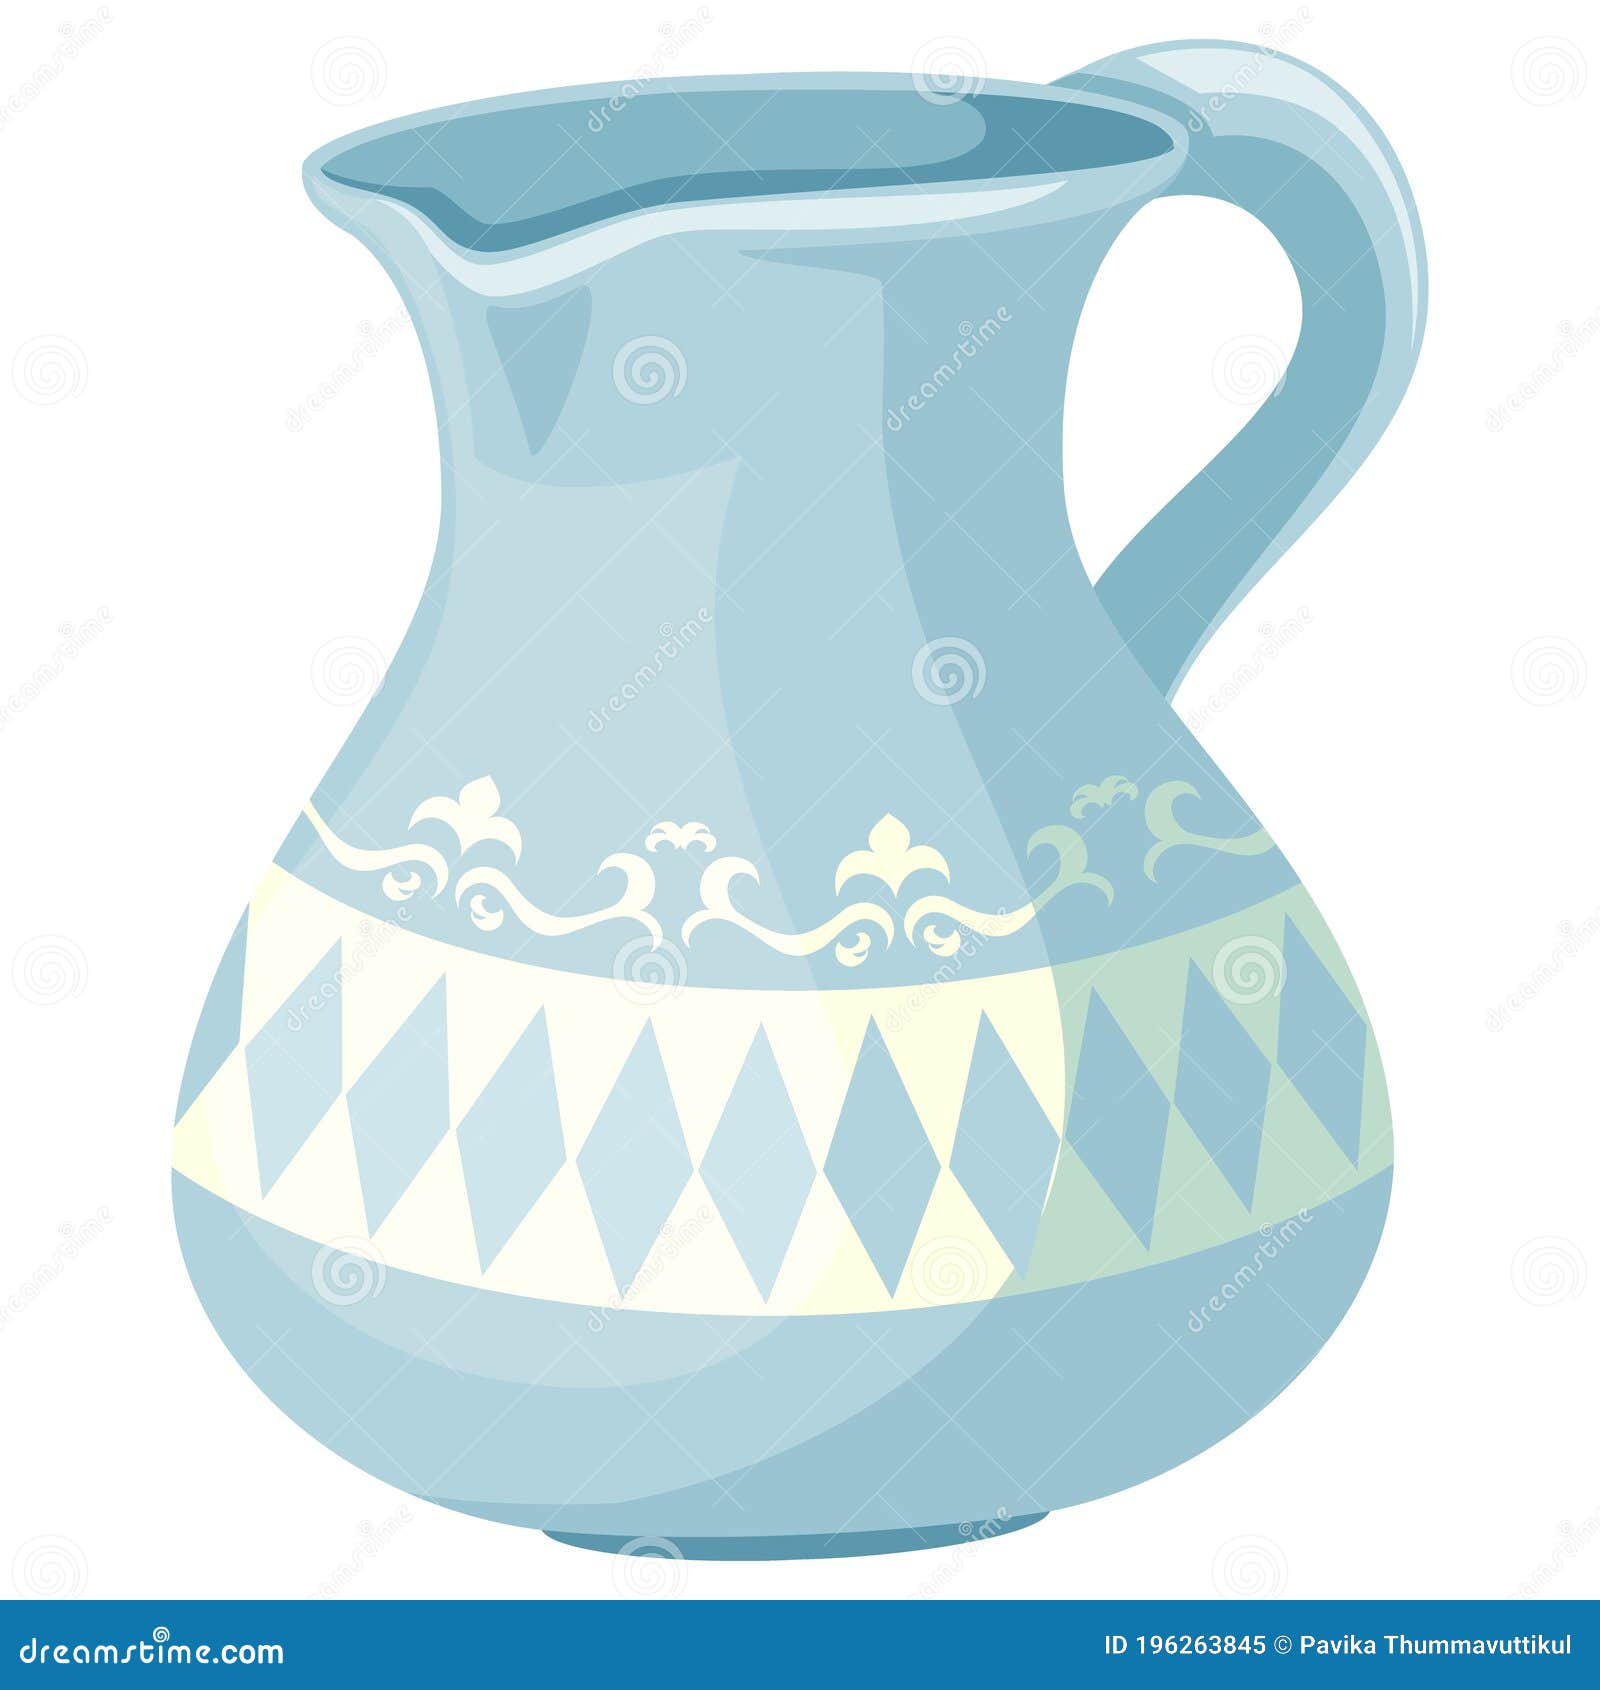 Cute pitcher clipart stock vector. Illustration of english - 196263845